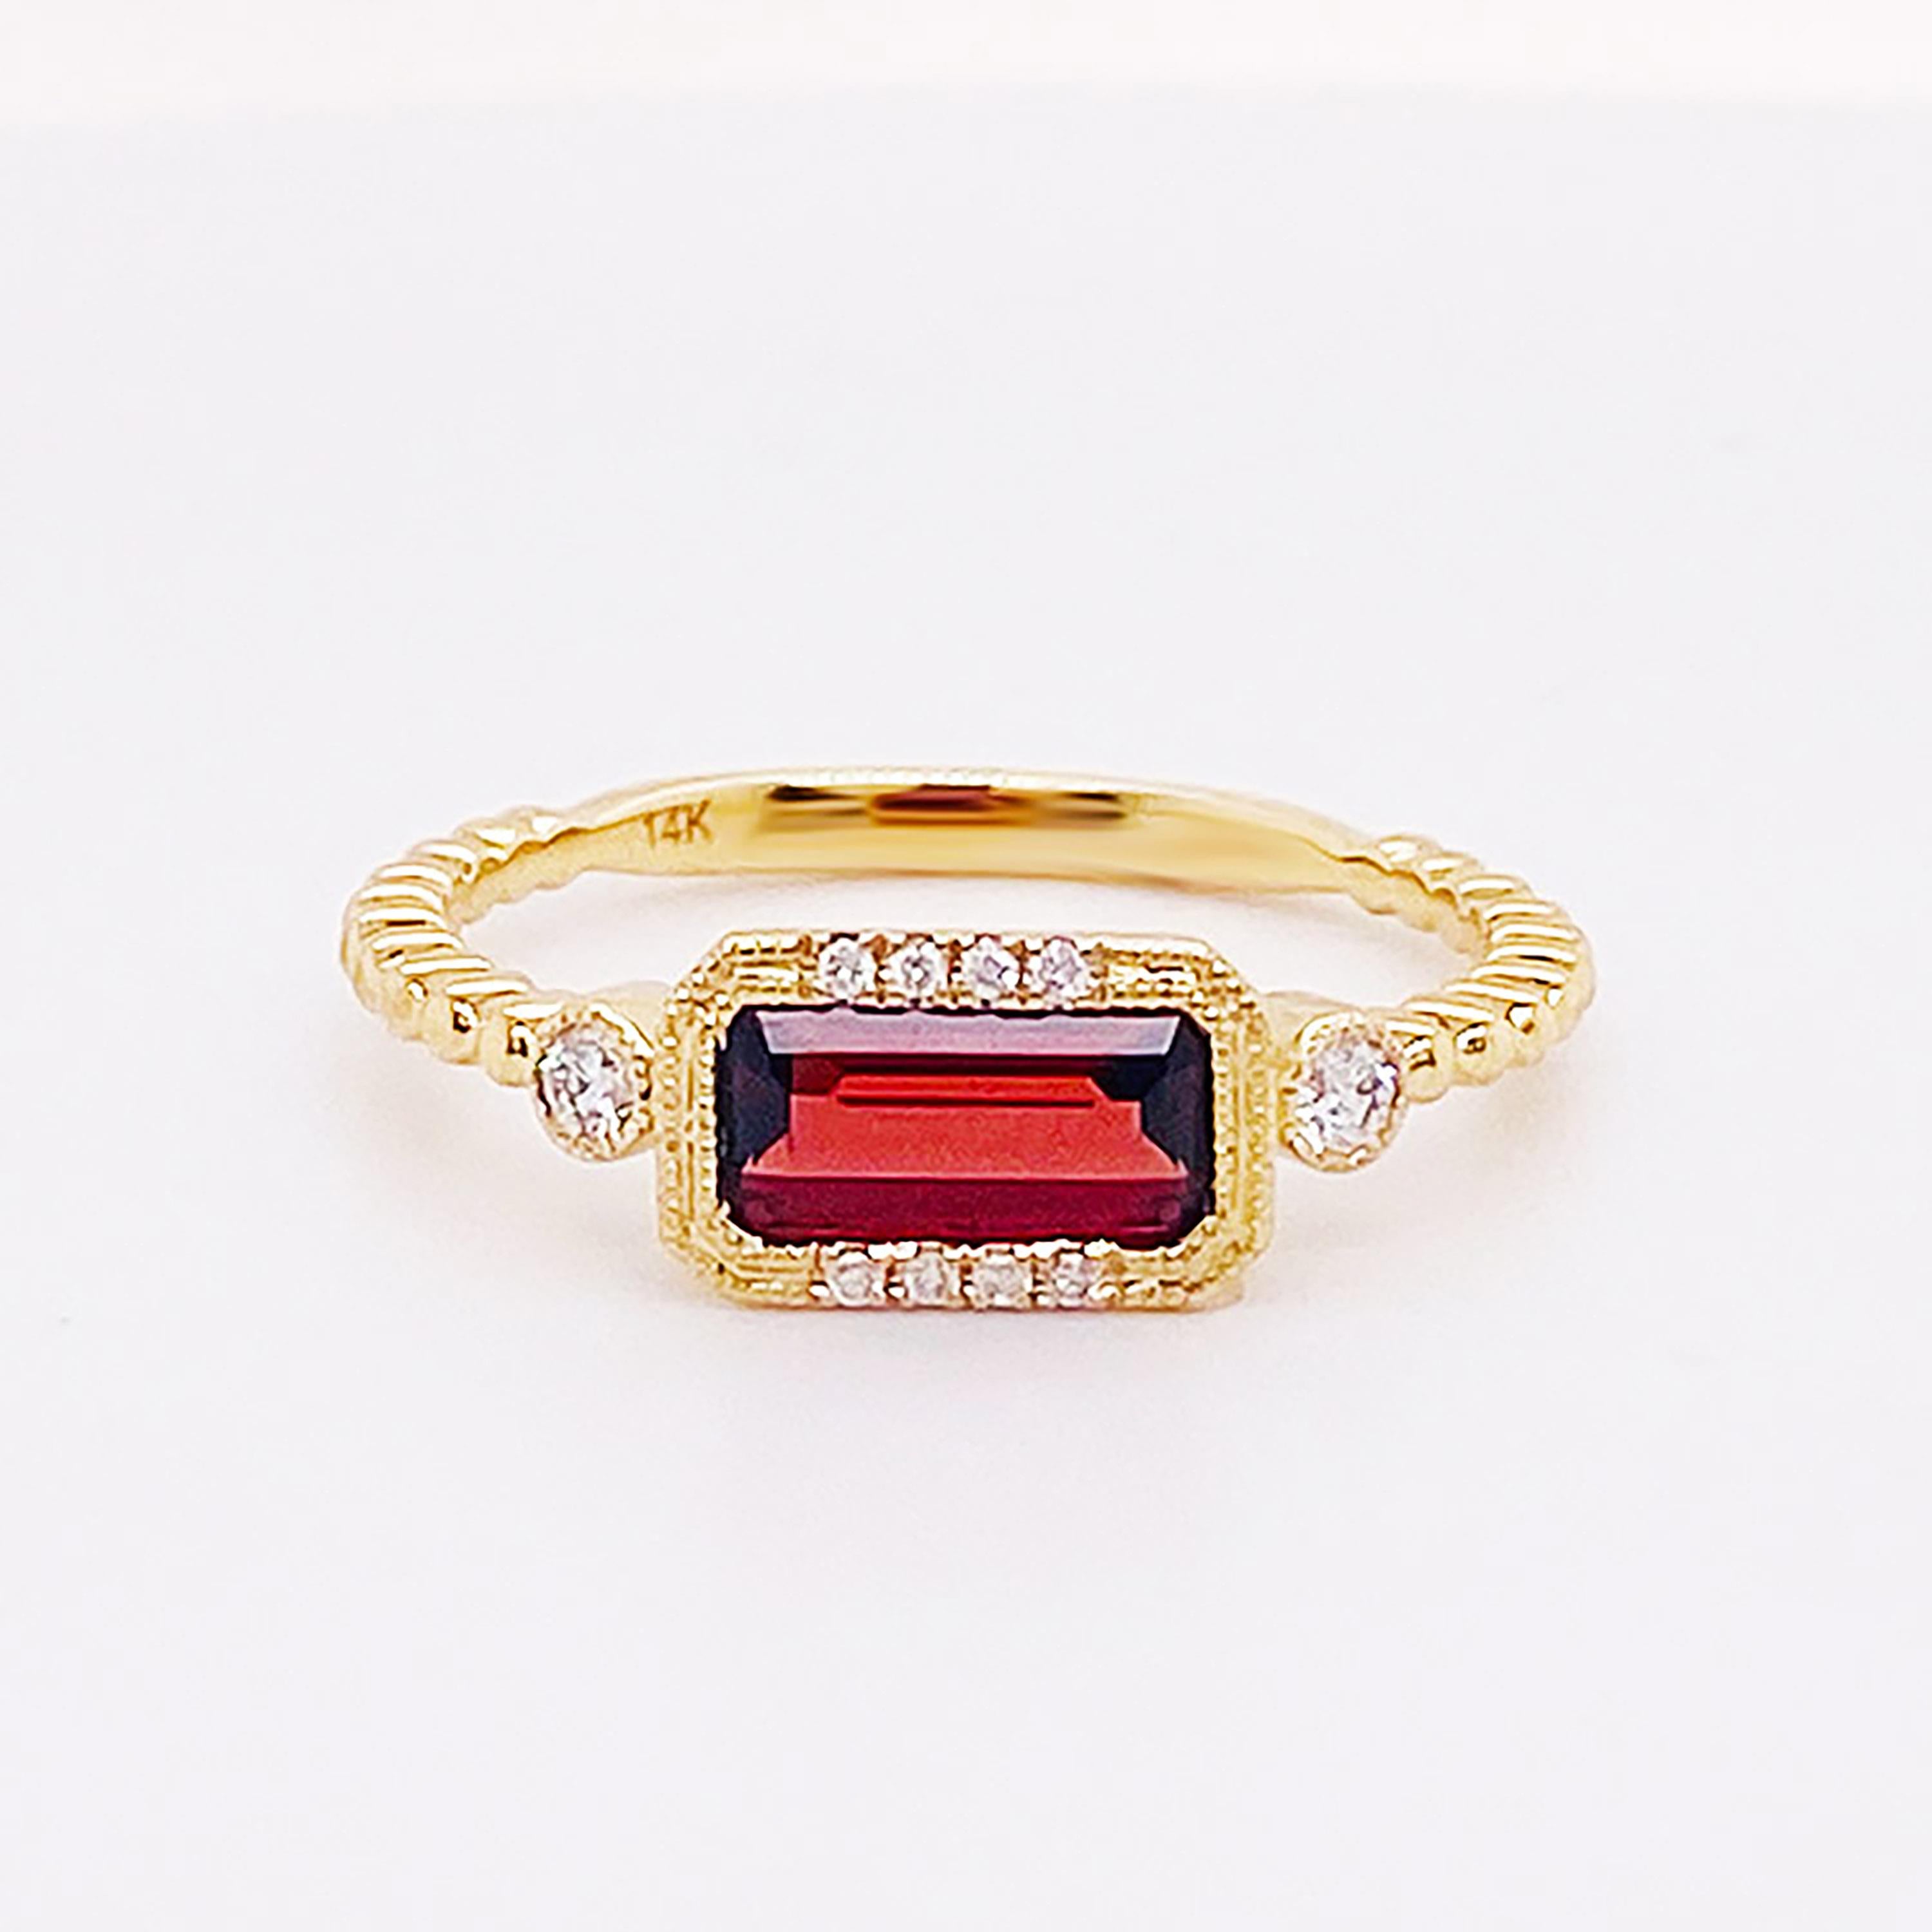 For Sale:  Garnet Diamond Ring January East to West 14K Gold Yellow Gold 2